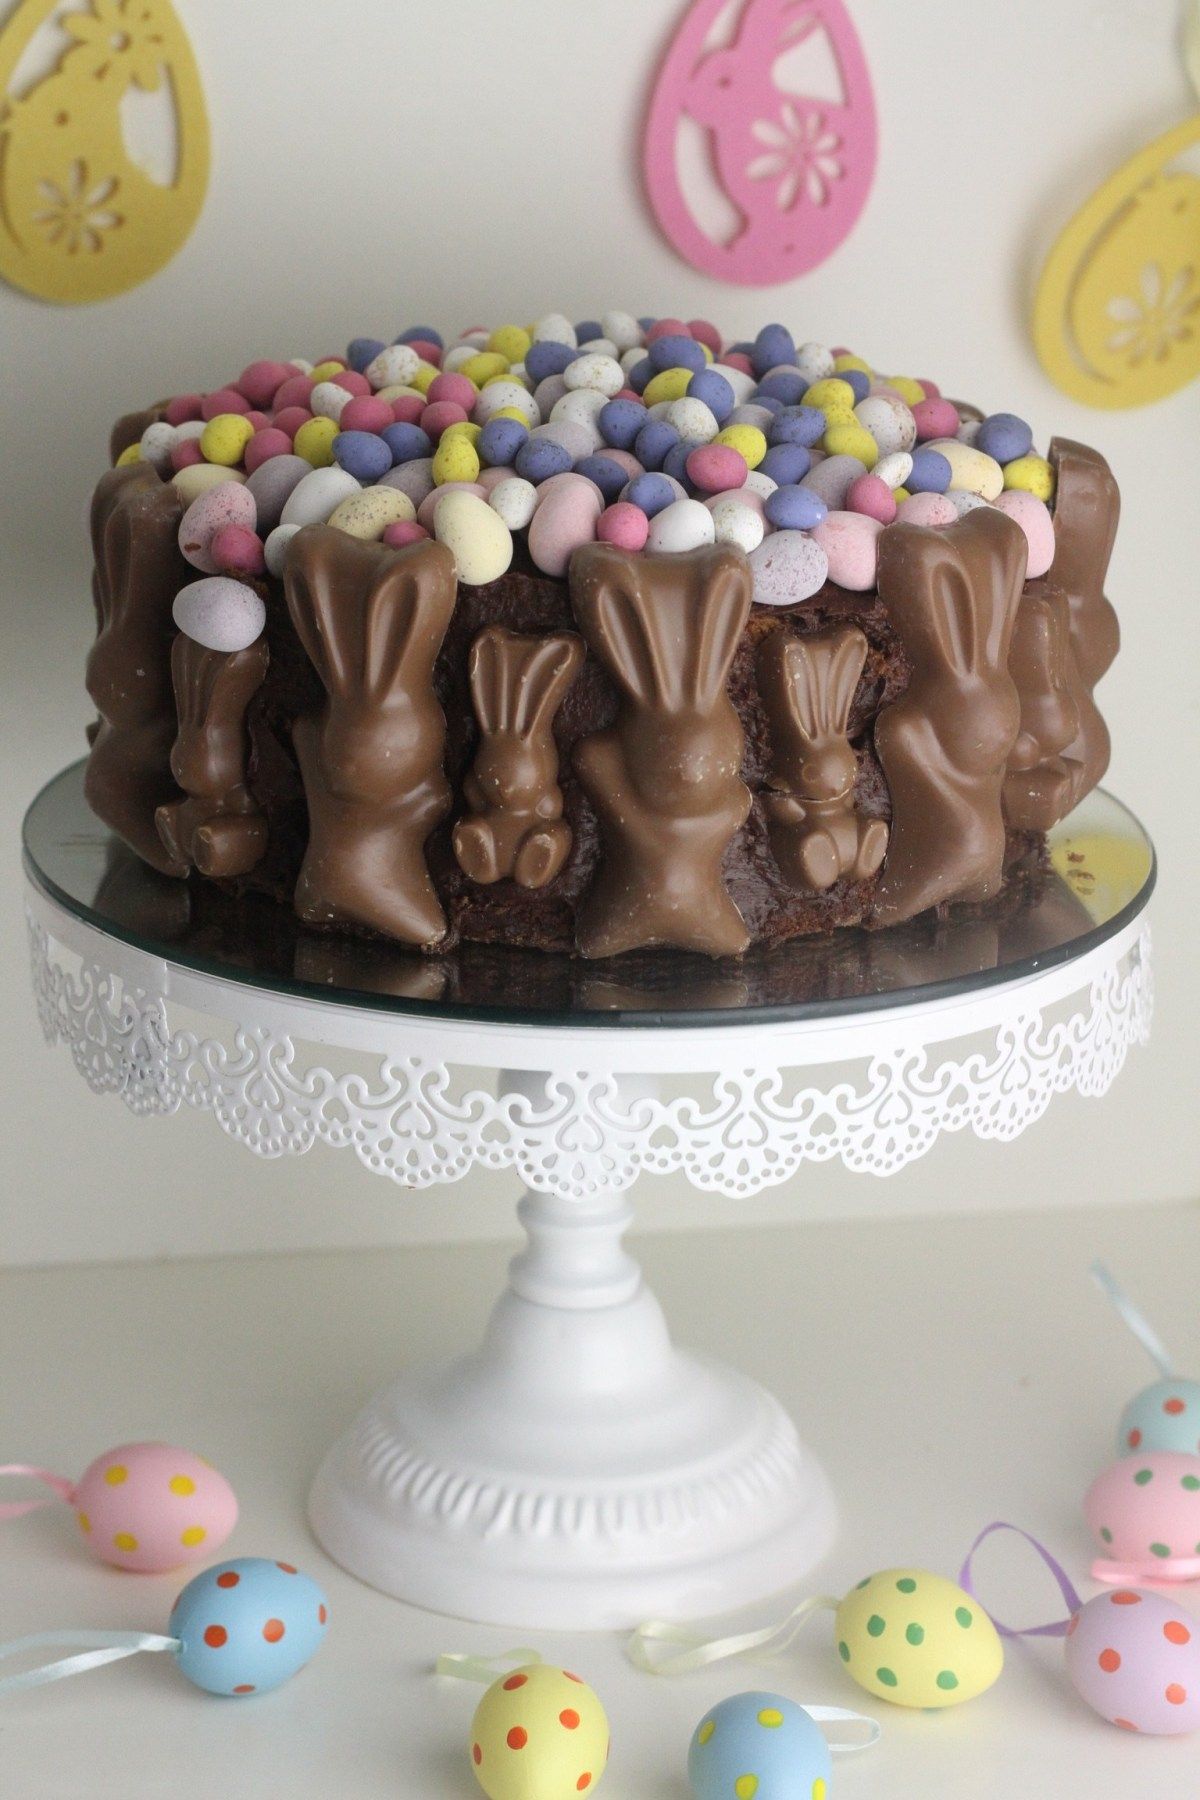 7 Super-Simple Easter Treat Ideas To Bake With Kids - Peanut Blossom